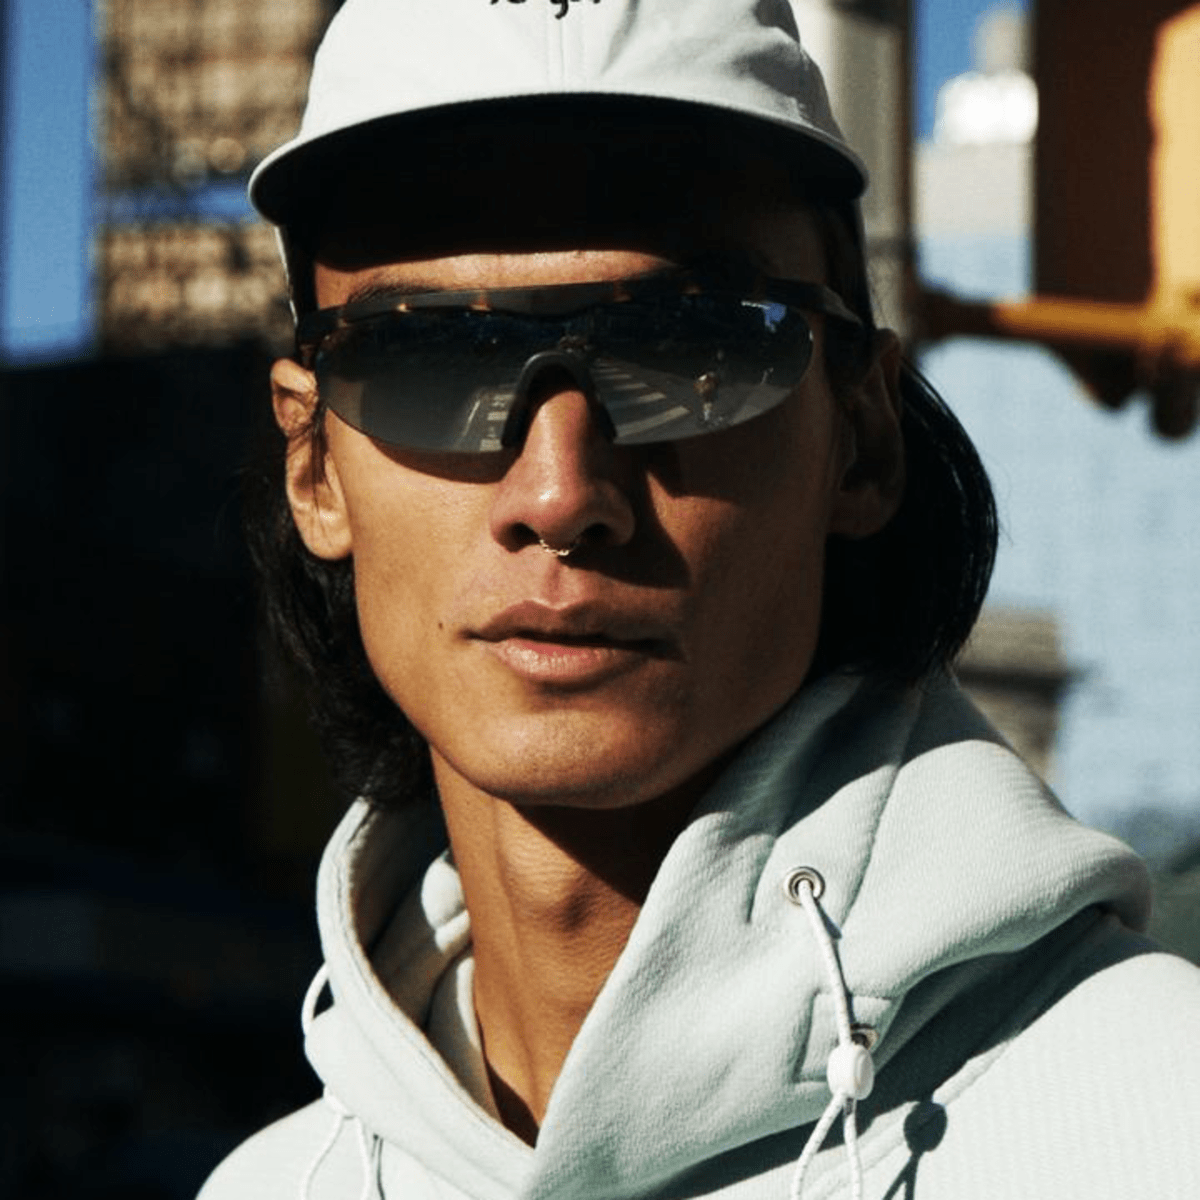 Satisfy Running and District Vision Launch Cool Sunglasses Collab - Airows